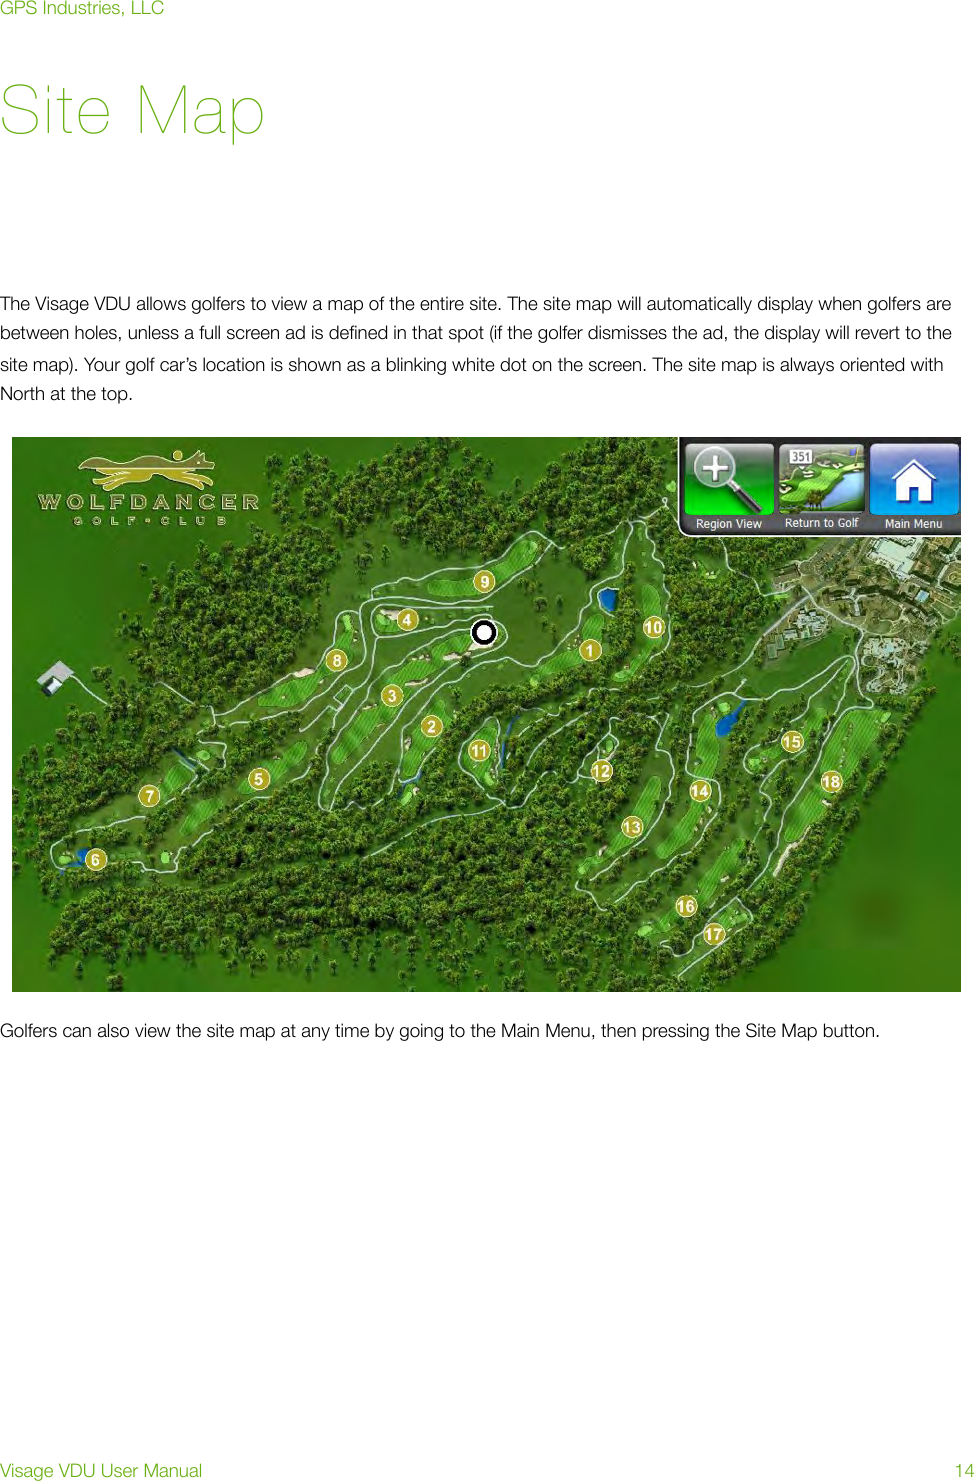 Site MapThe Visage VDU allows golfers to view a map of the entire site. The site map will automatically display when golfers are between holes, unless a full screen ad is deﬁned in that spot (if the golfer dismisses the ad, the display will revert to the site map). Your golf car’s location is shown as a blinking white dot on the screen. The site map is always oriented with North at the top.Golfers can also view the site map at any time by going to the Main Menu, then pressing the Site Map button. GPS Industries, LLCVisage VDU User Manual!14